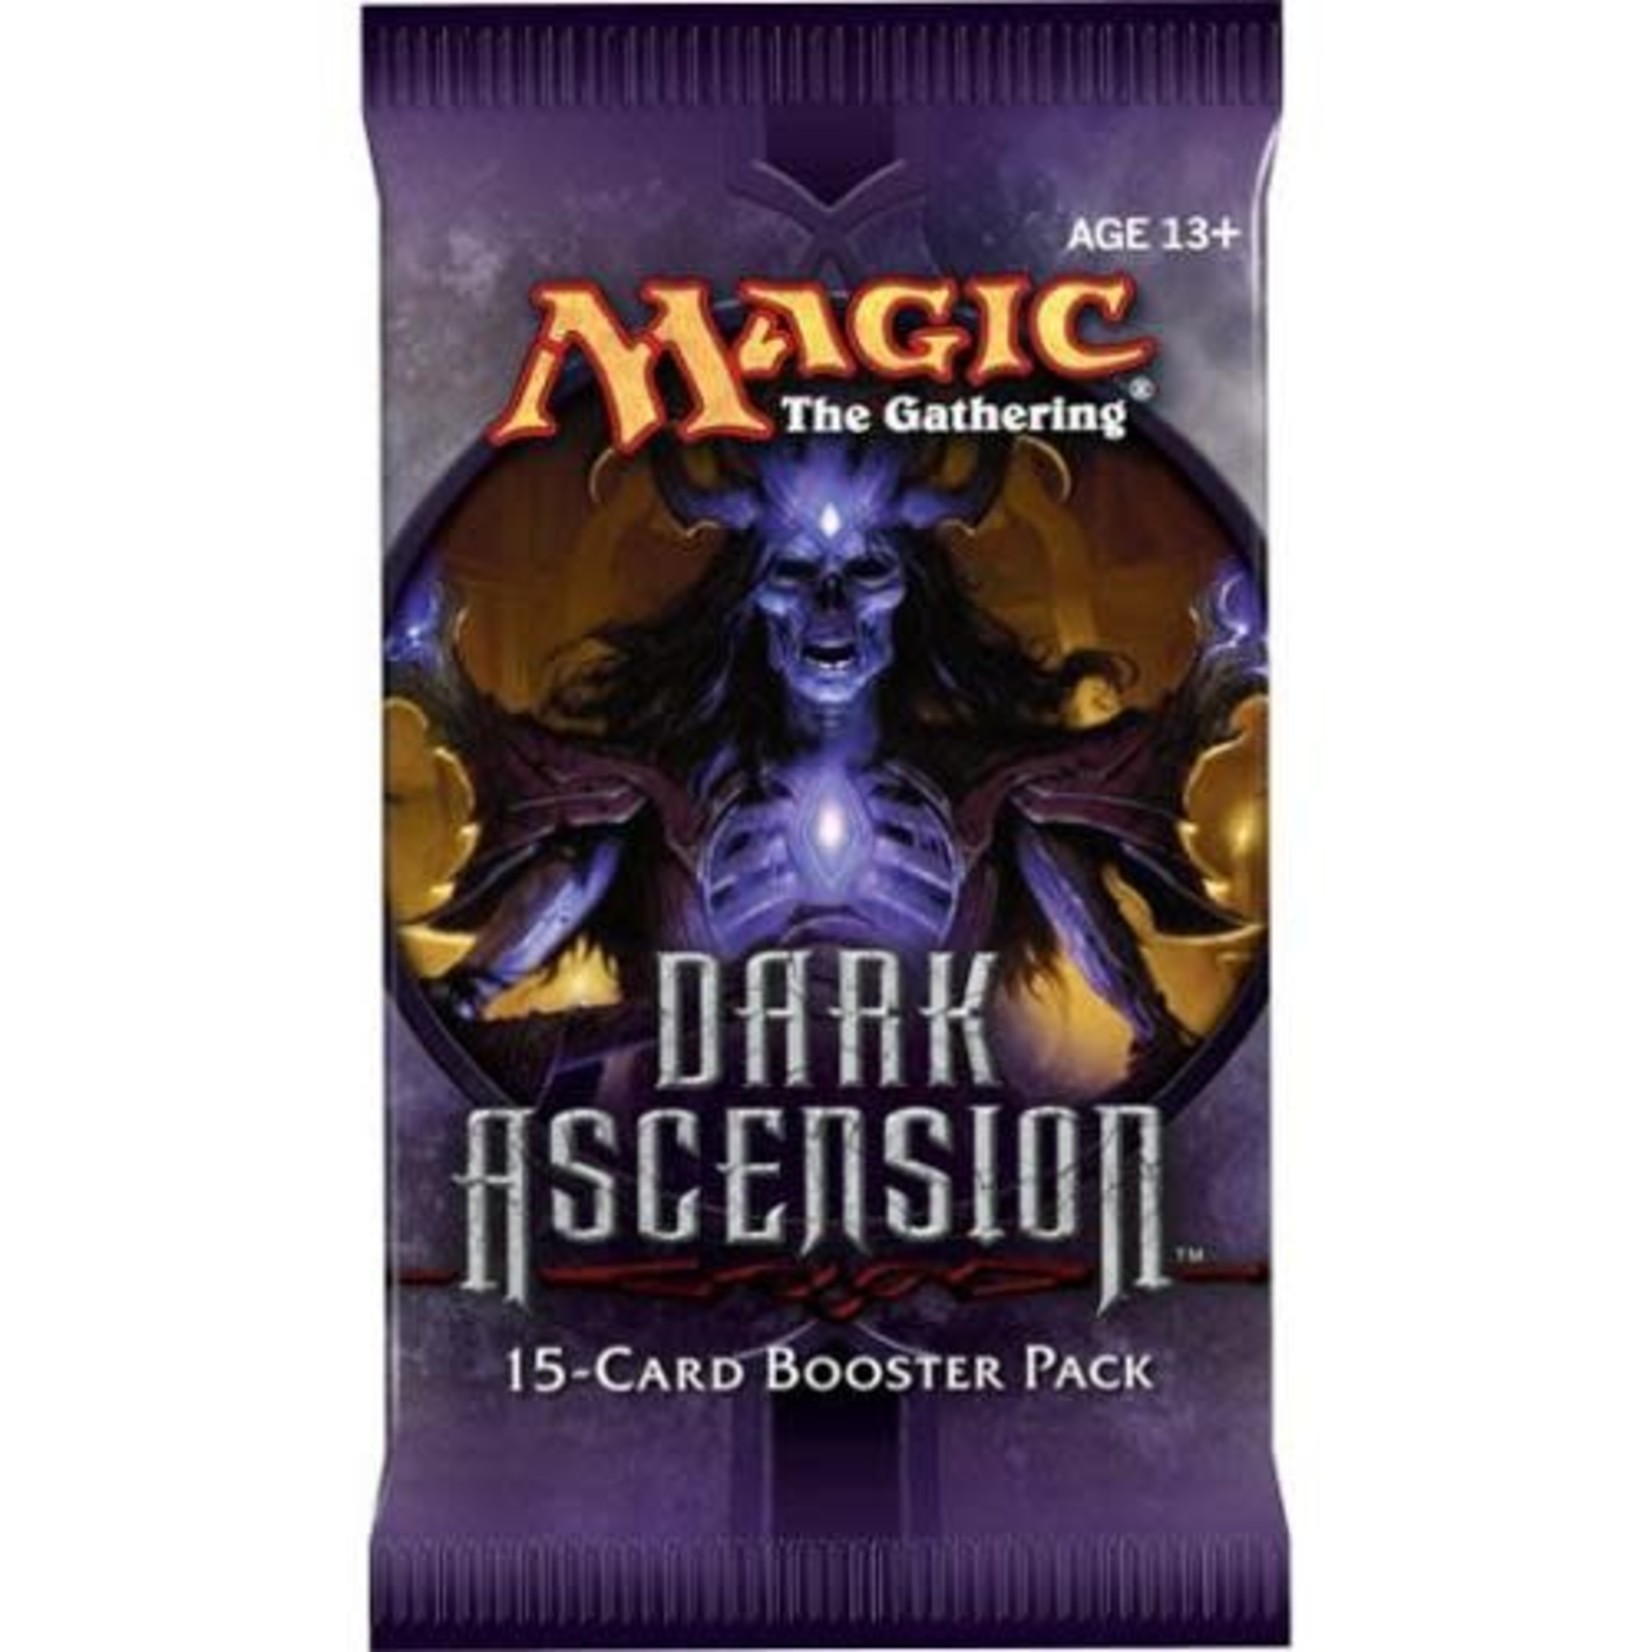 Wizards of the Coast Magic the Gathering Dark Ascension Booster Pack